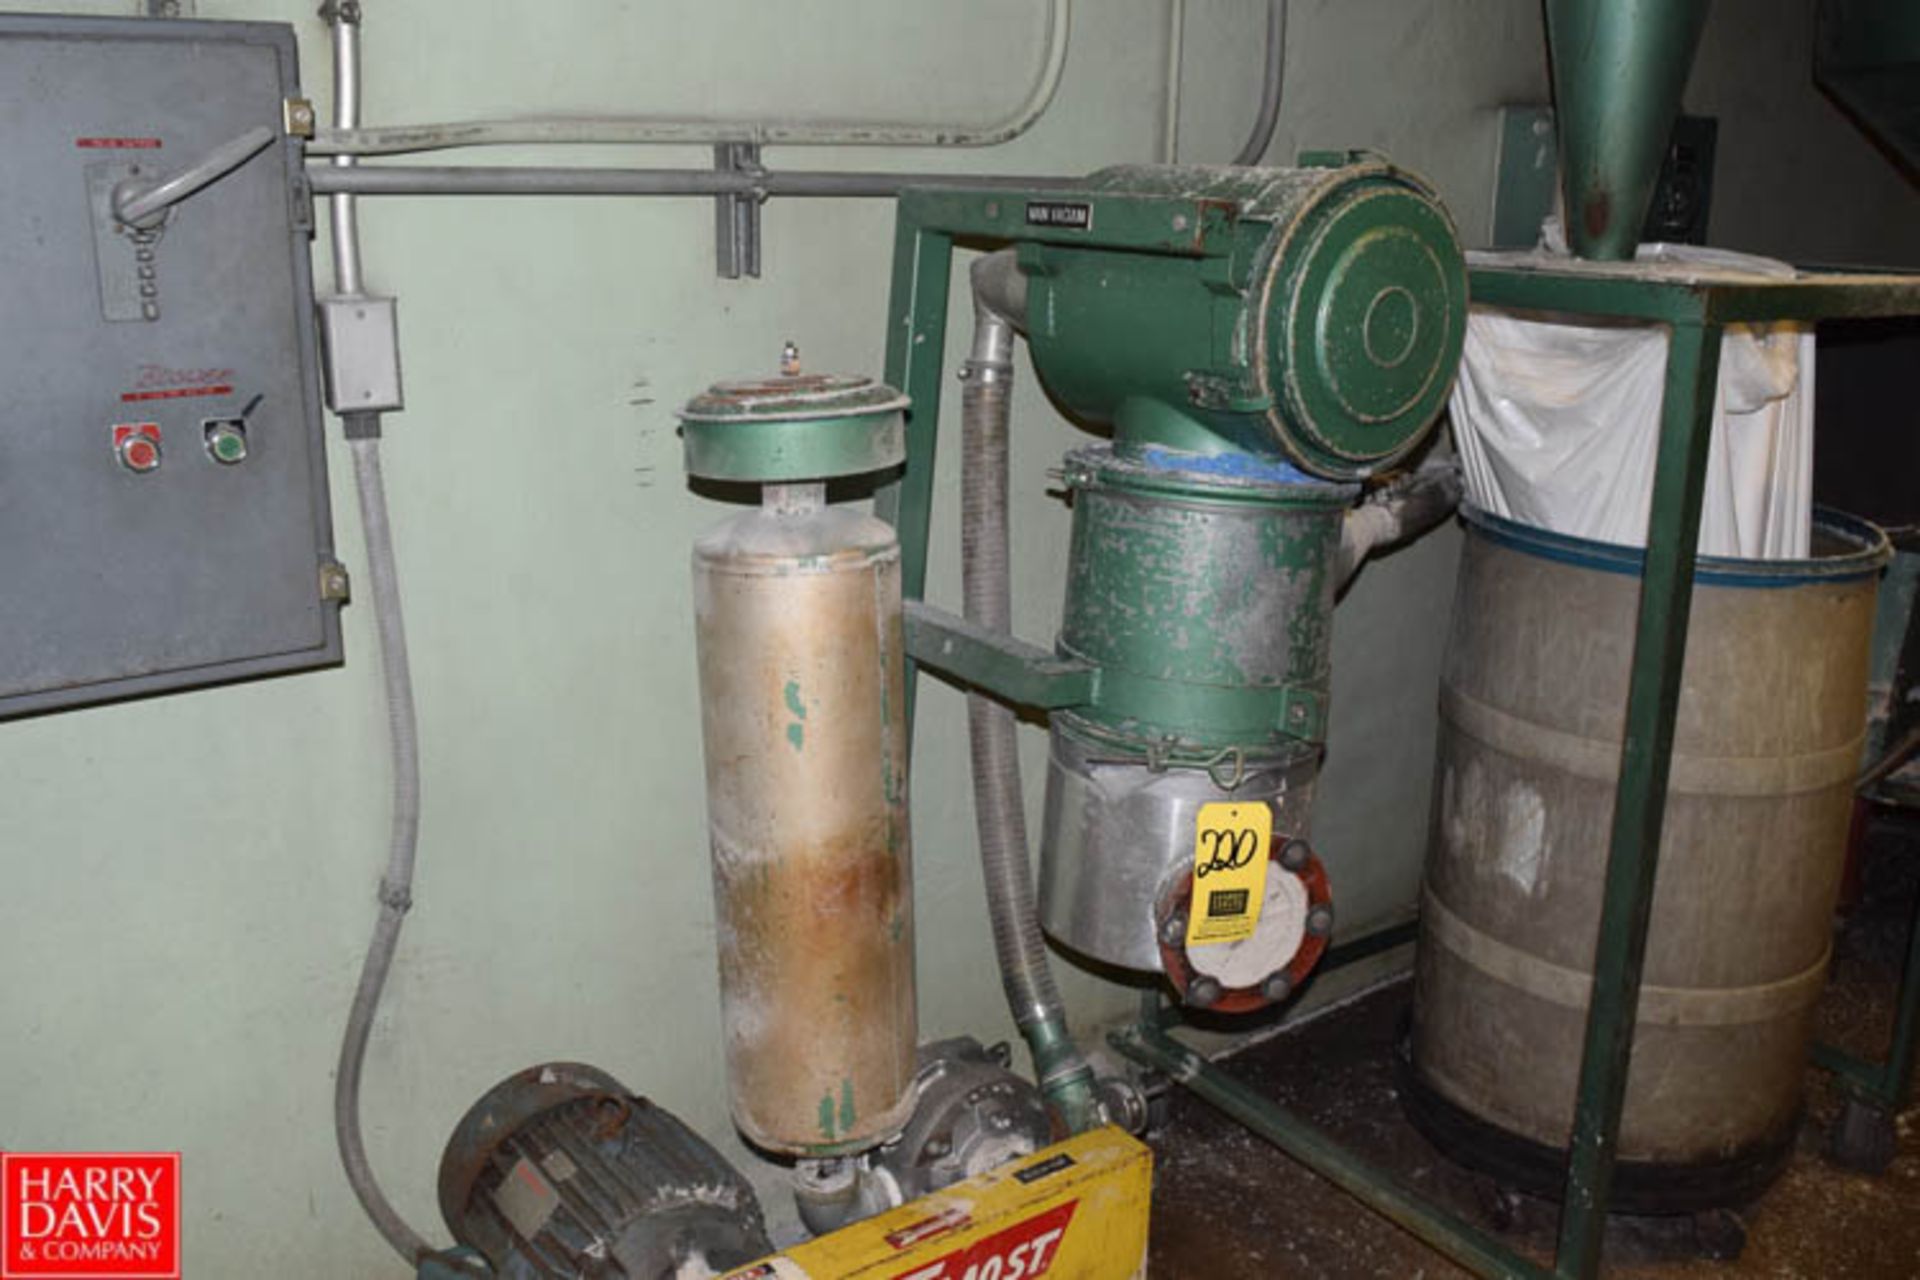 Foremost Vacuum Resin Blower with 1,700 RPM Motor - Rigging Fee: $ 750